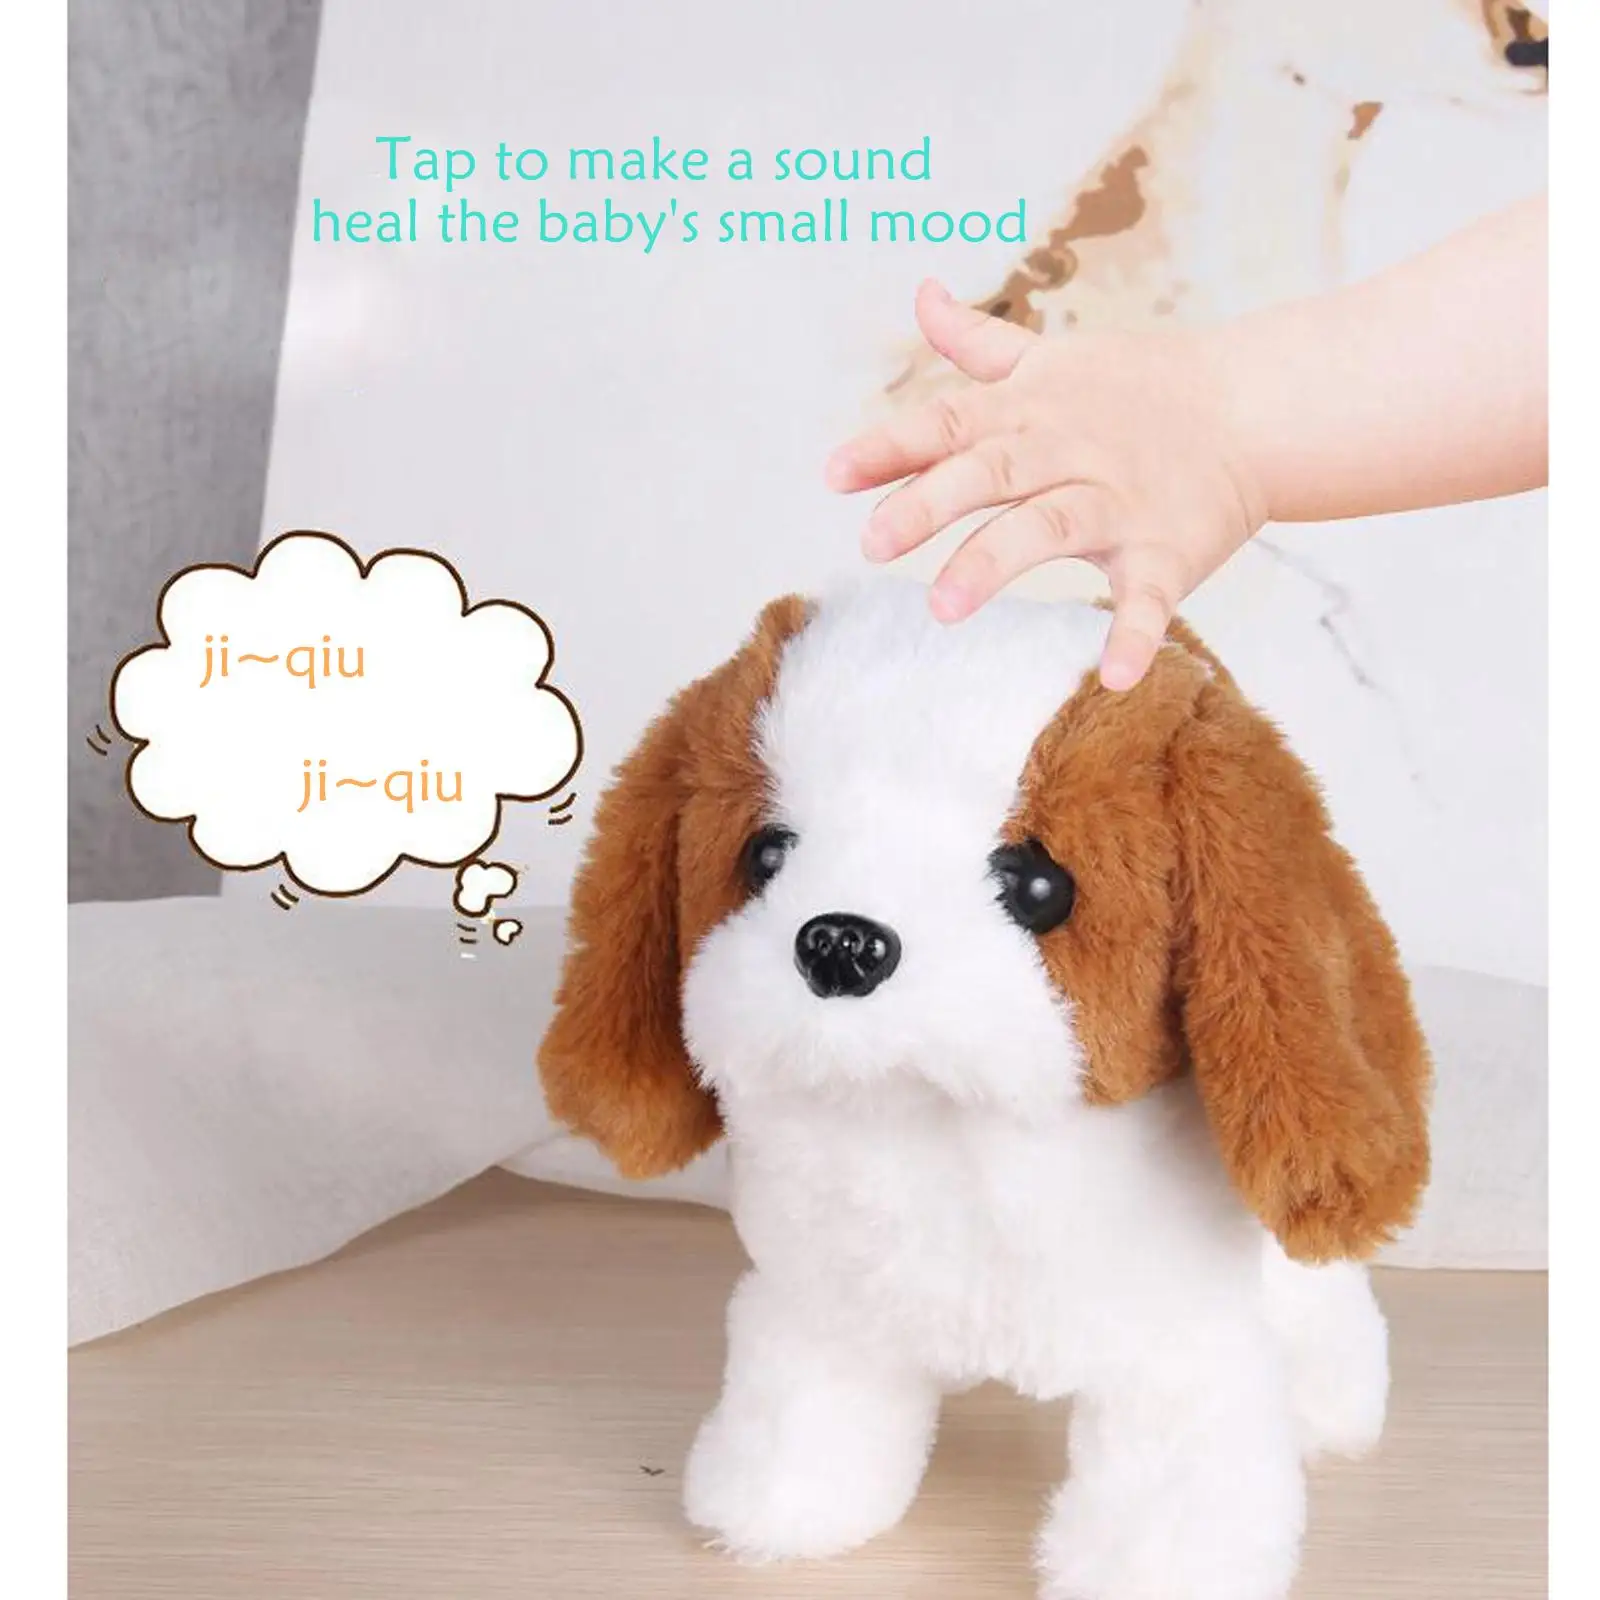 Electronic Plush   Wag Tail   Animal for Children Birthday Gift Play House Stuff for Kids Stuffed Animals